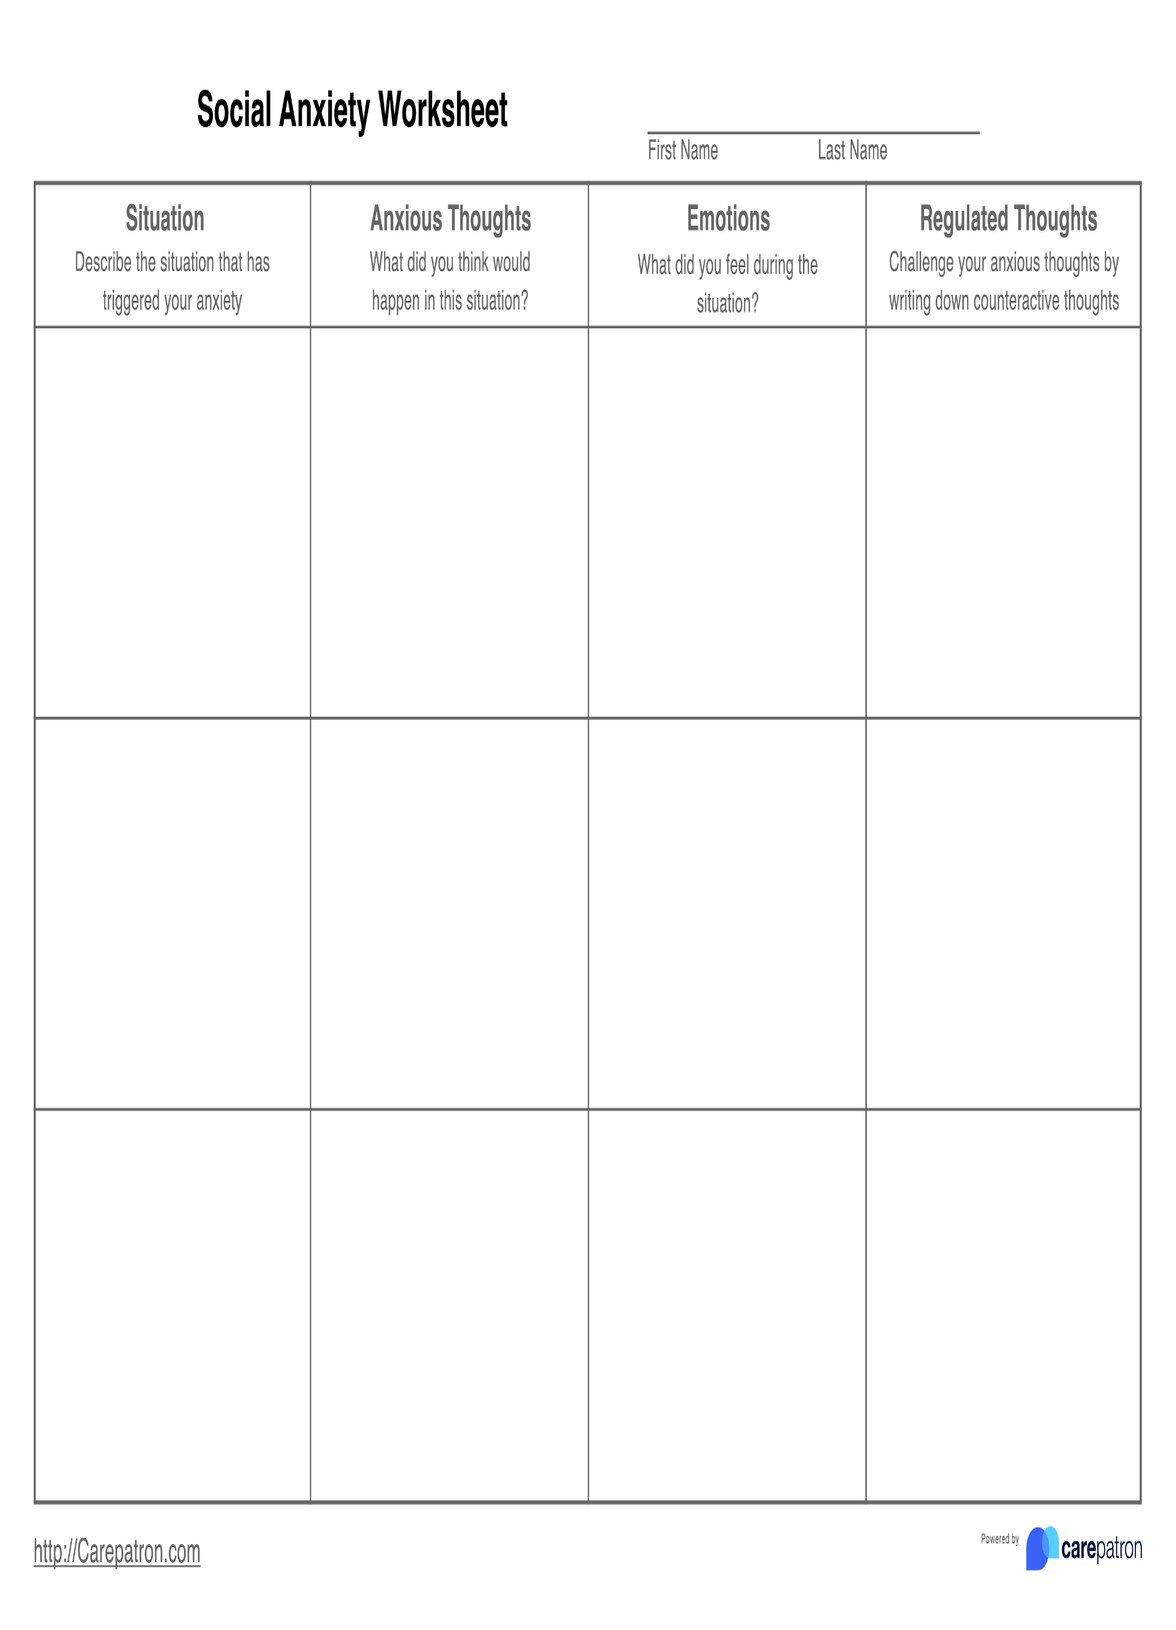 Social Anxiety Worksheets PDF Example